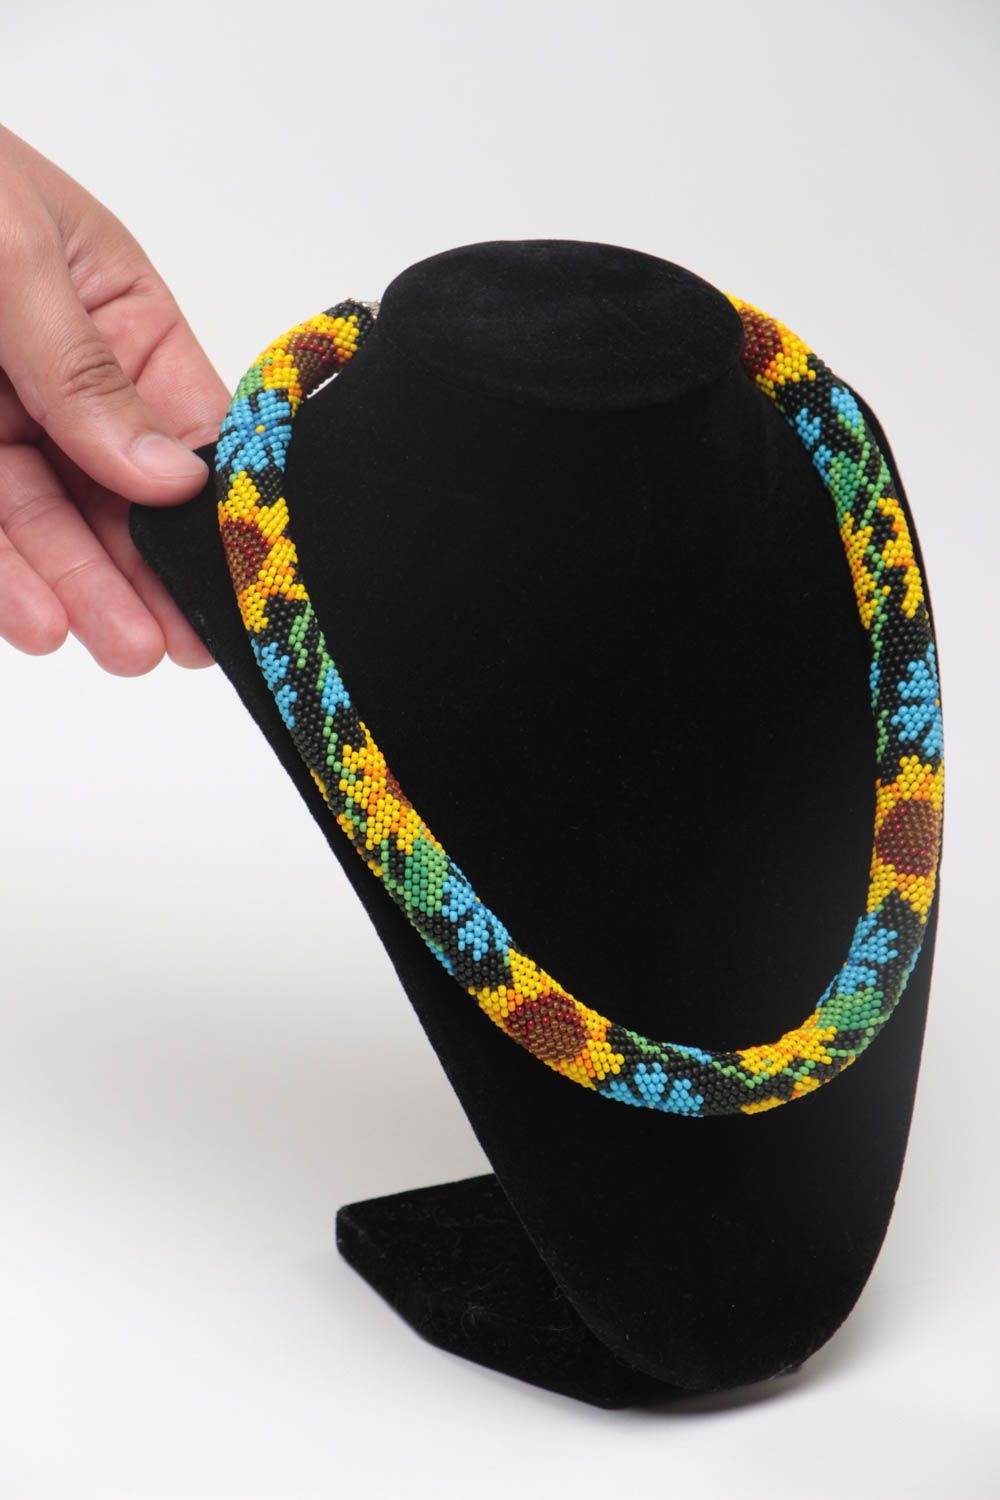 Handmade designer bead woven cord necklace with sunflowers on black background photo 5